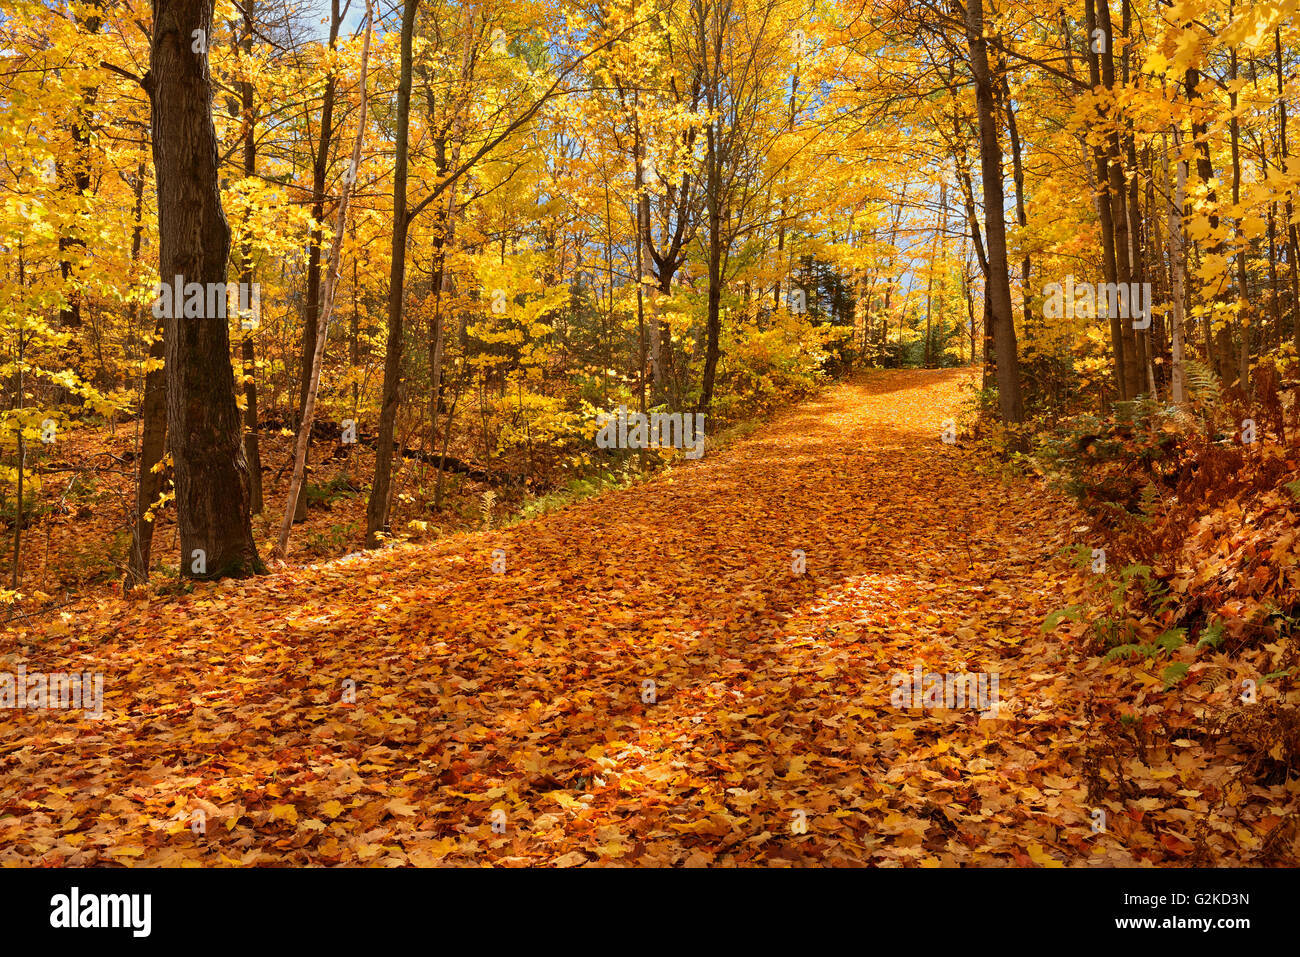 Country road covered with autumn leaves Fairbanks Provincial Park Ontario Canada Stock Photo